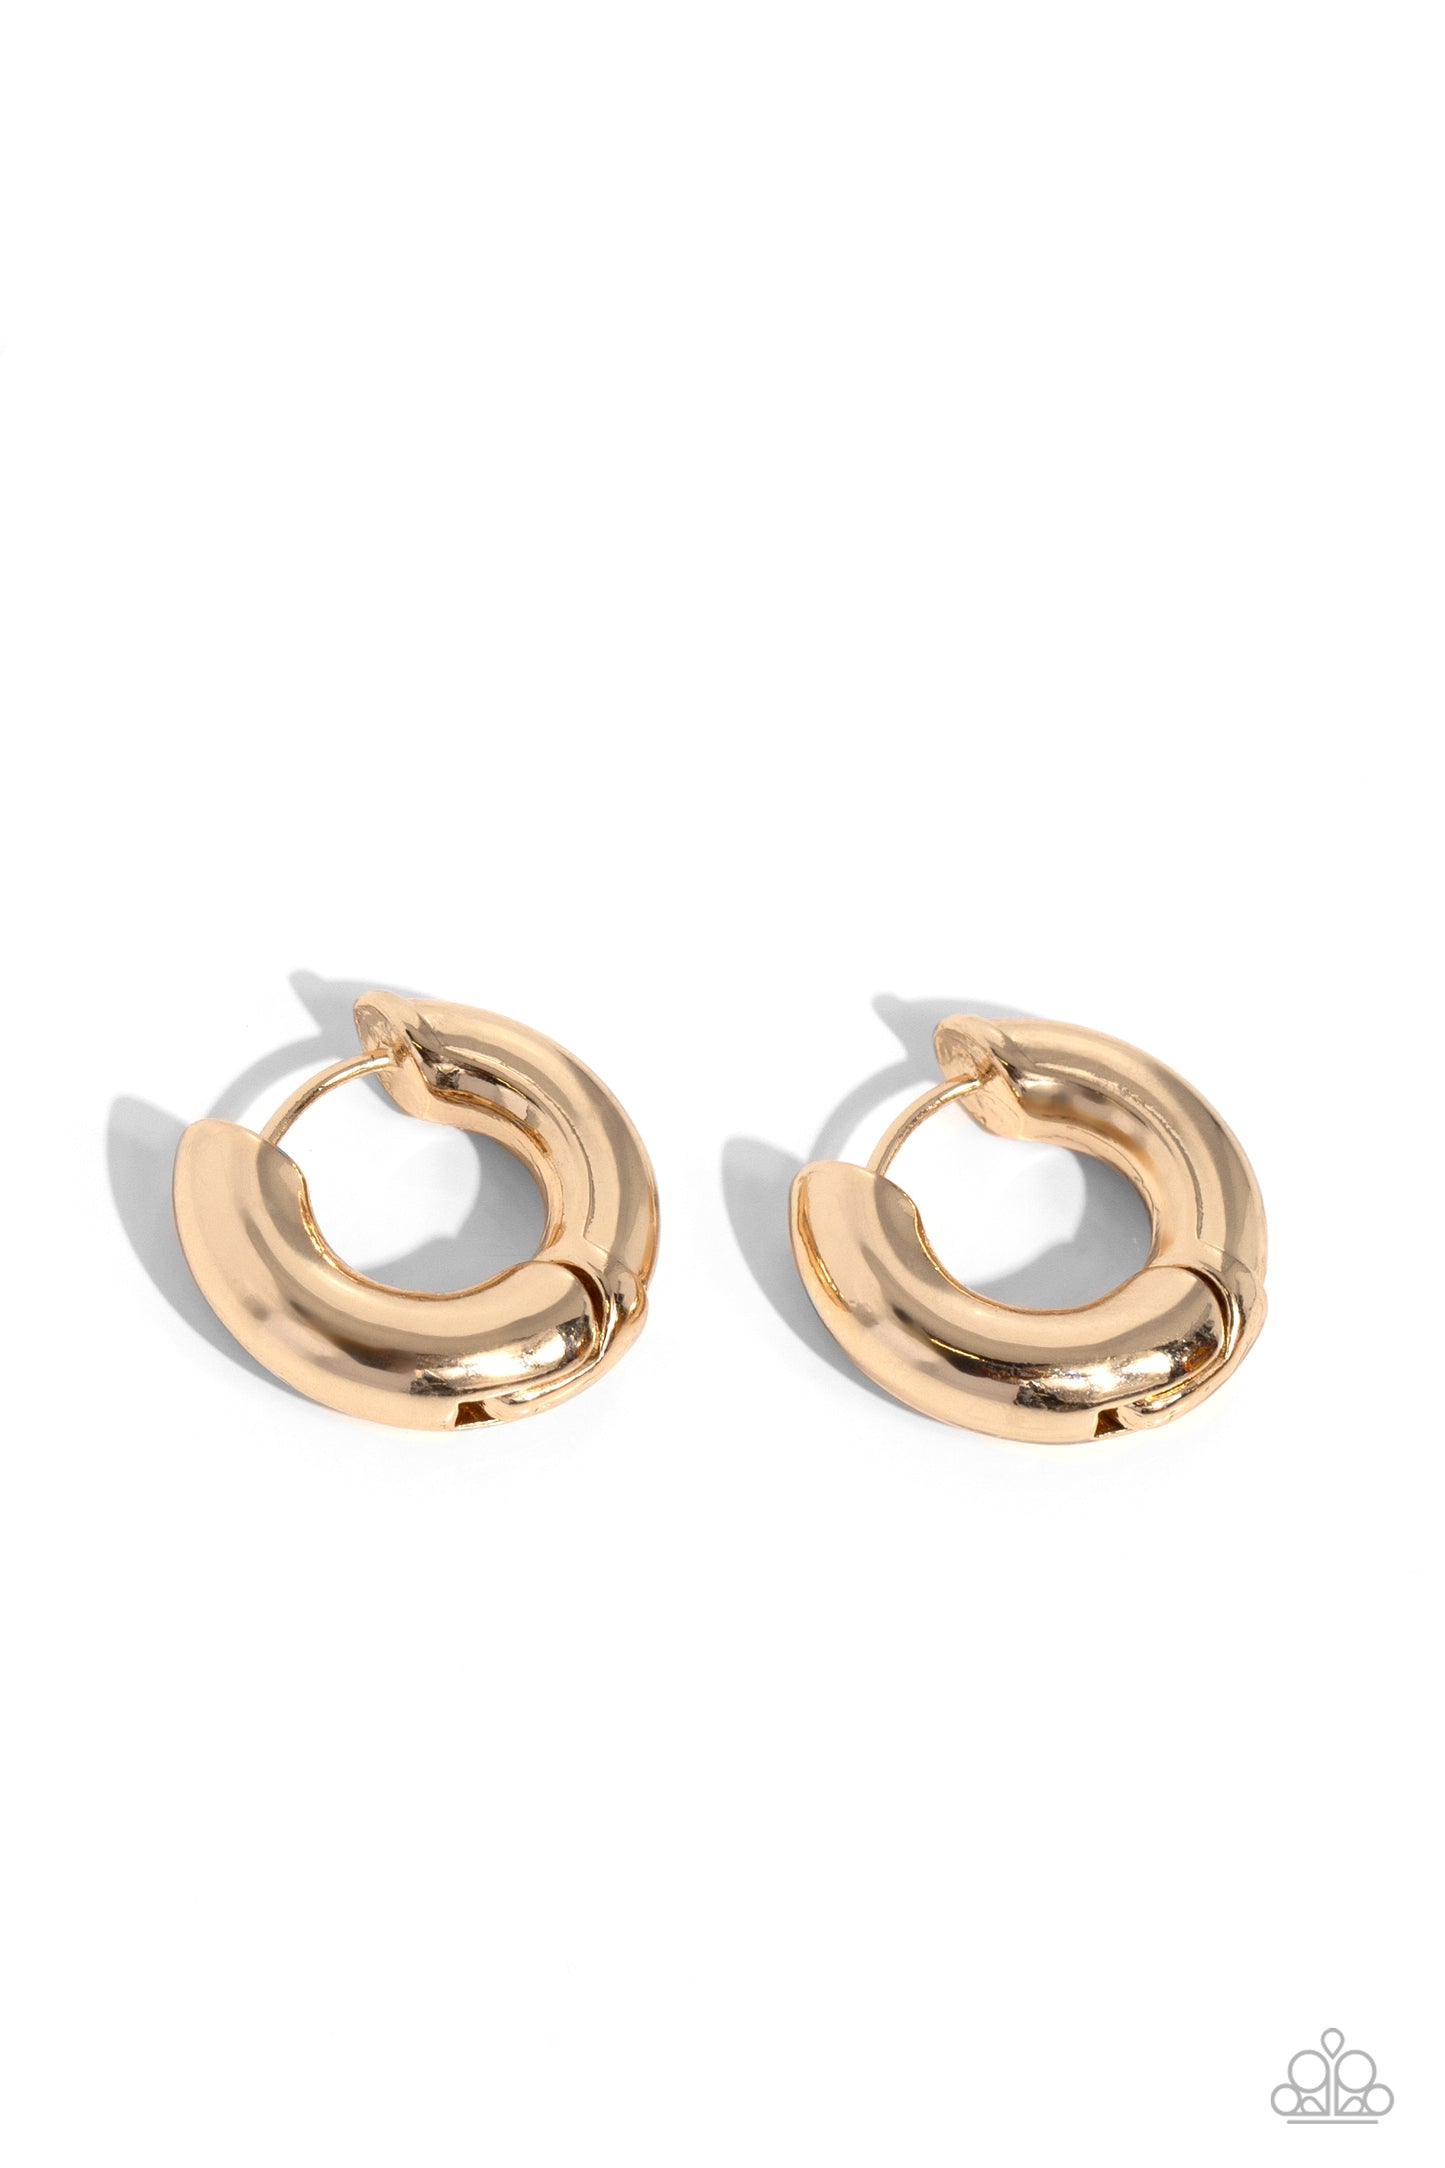 Textured Theme Gold Hoop Earrings Paparazzi